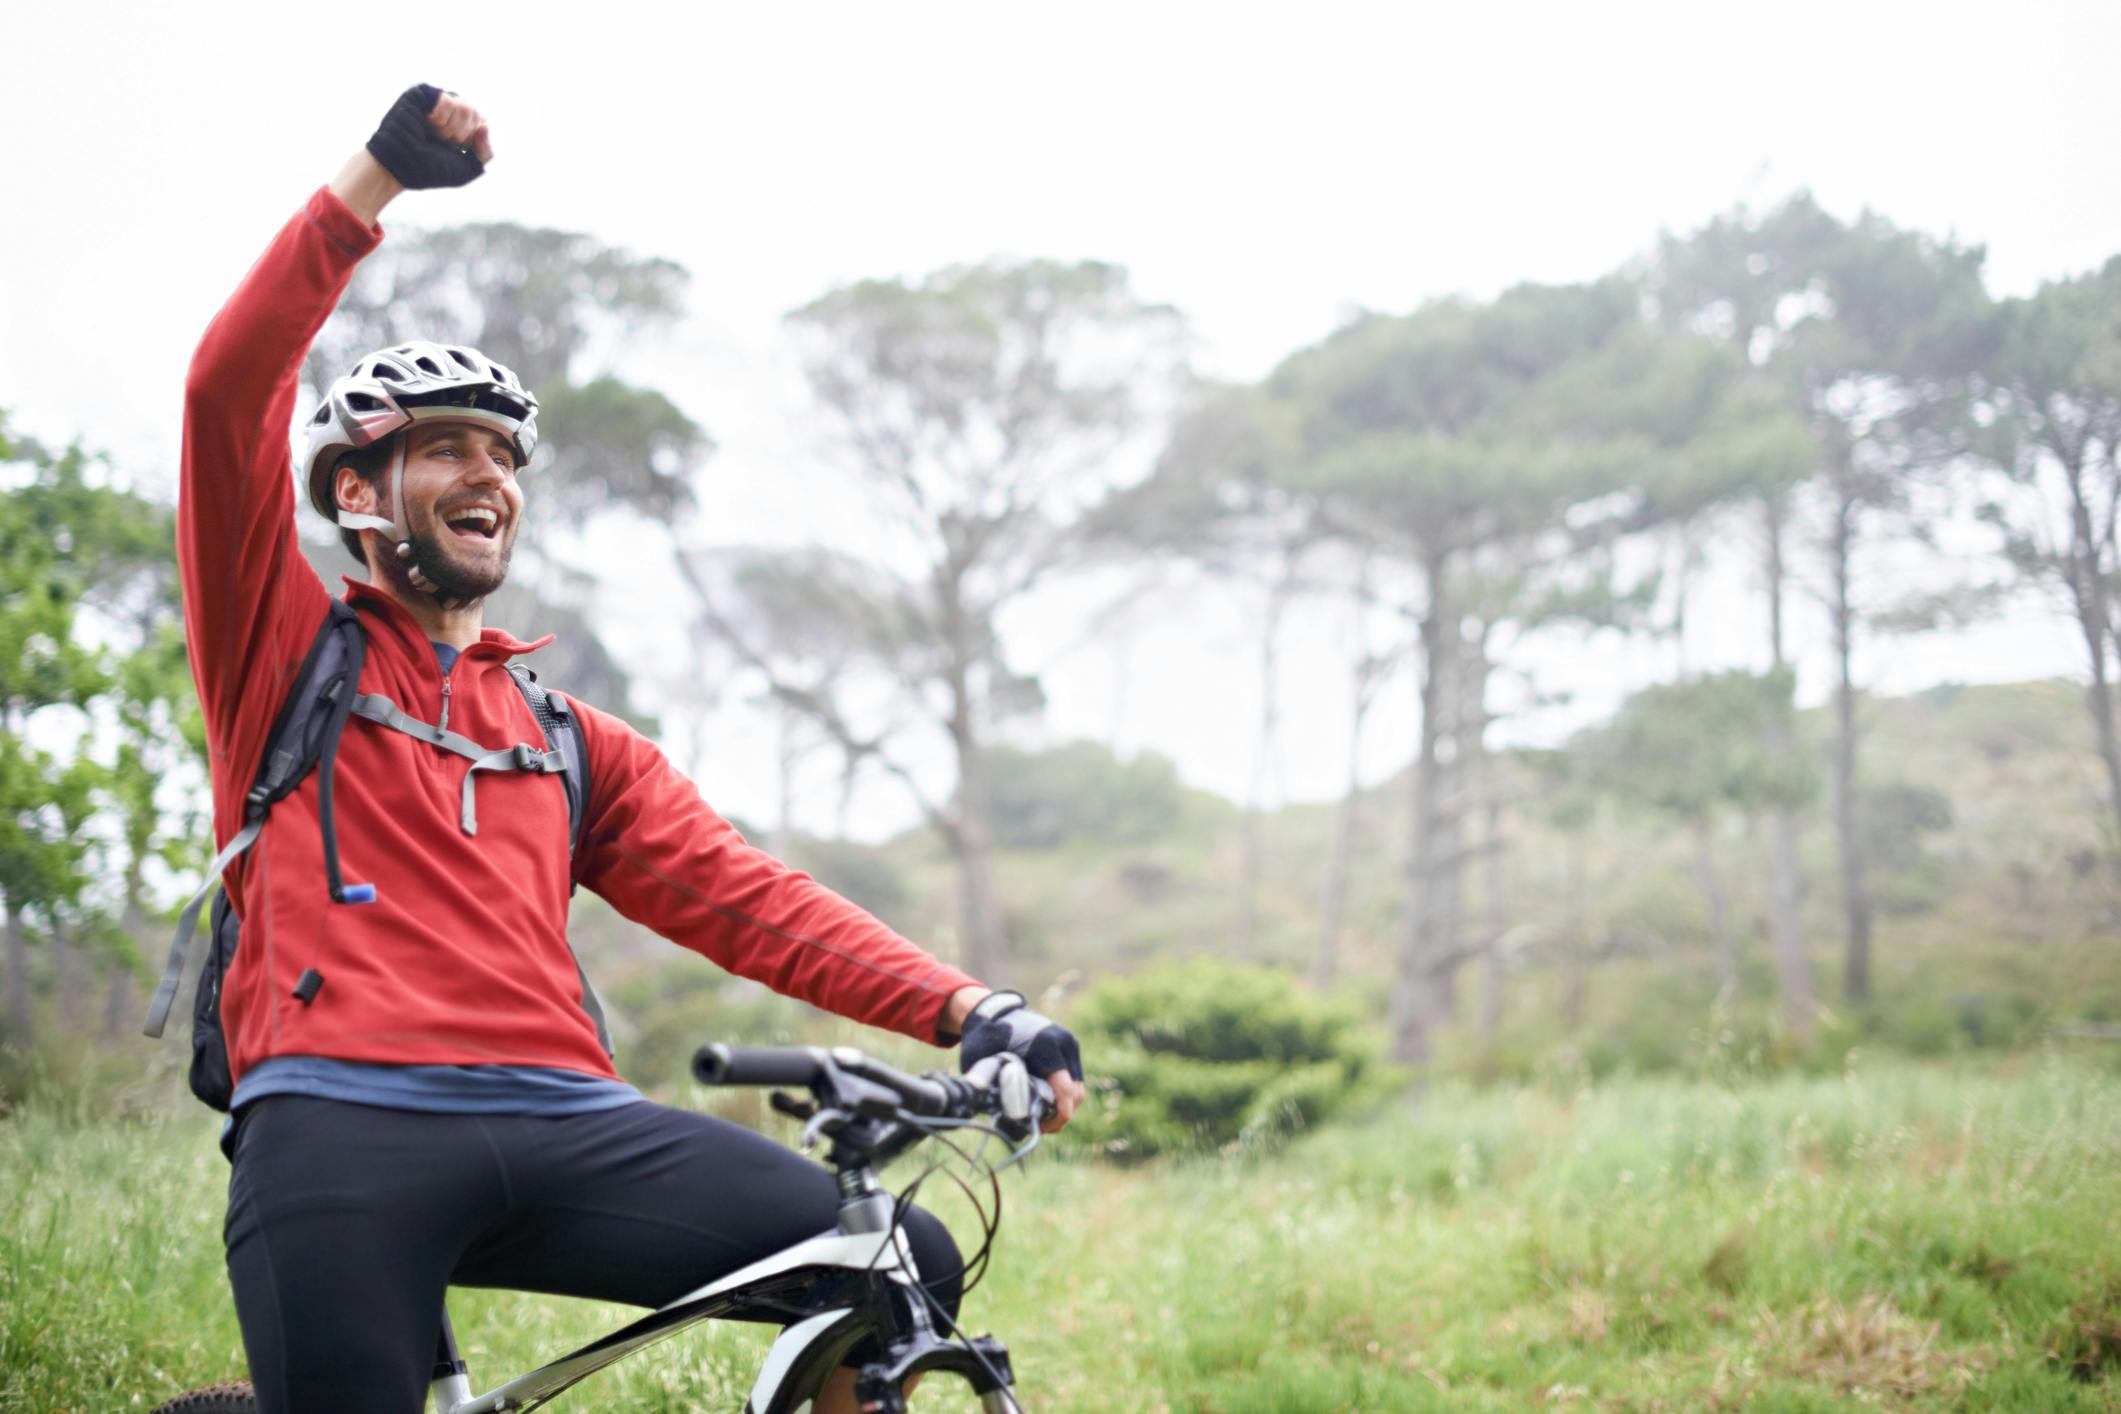 A young male athlete pumping his fist in the air after conquering a mountain biking trail